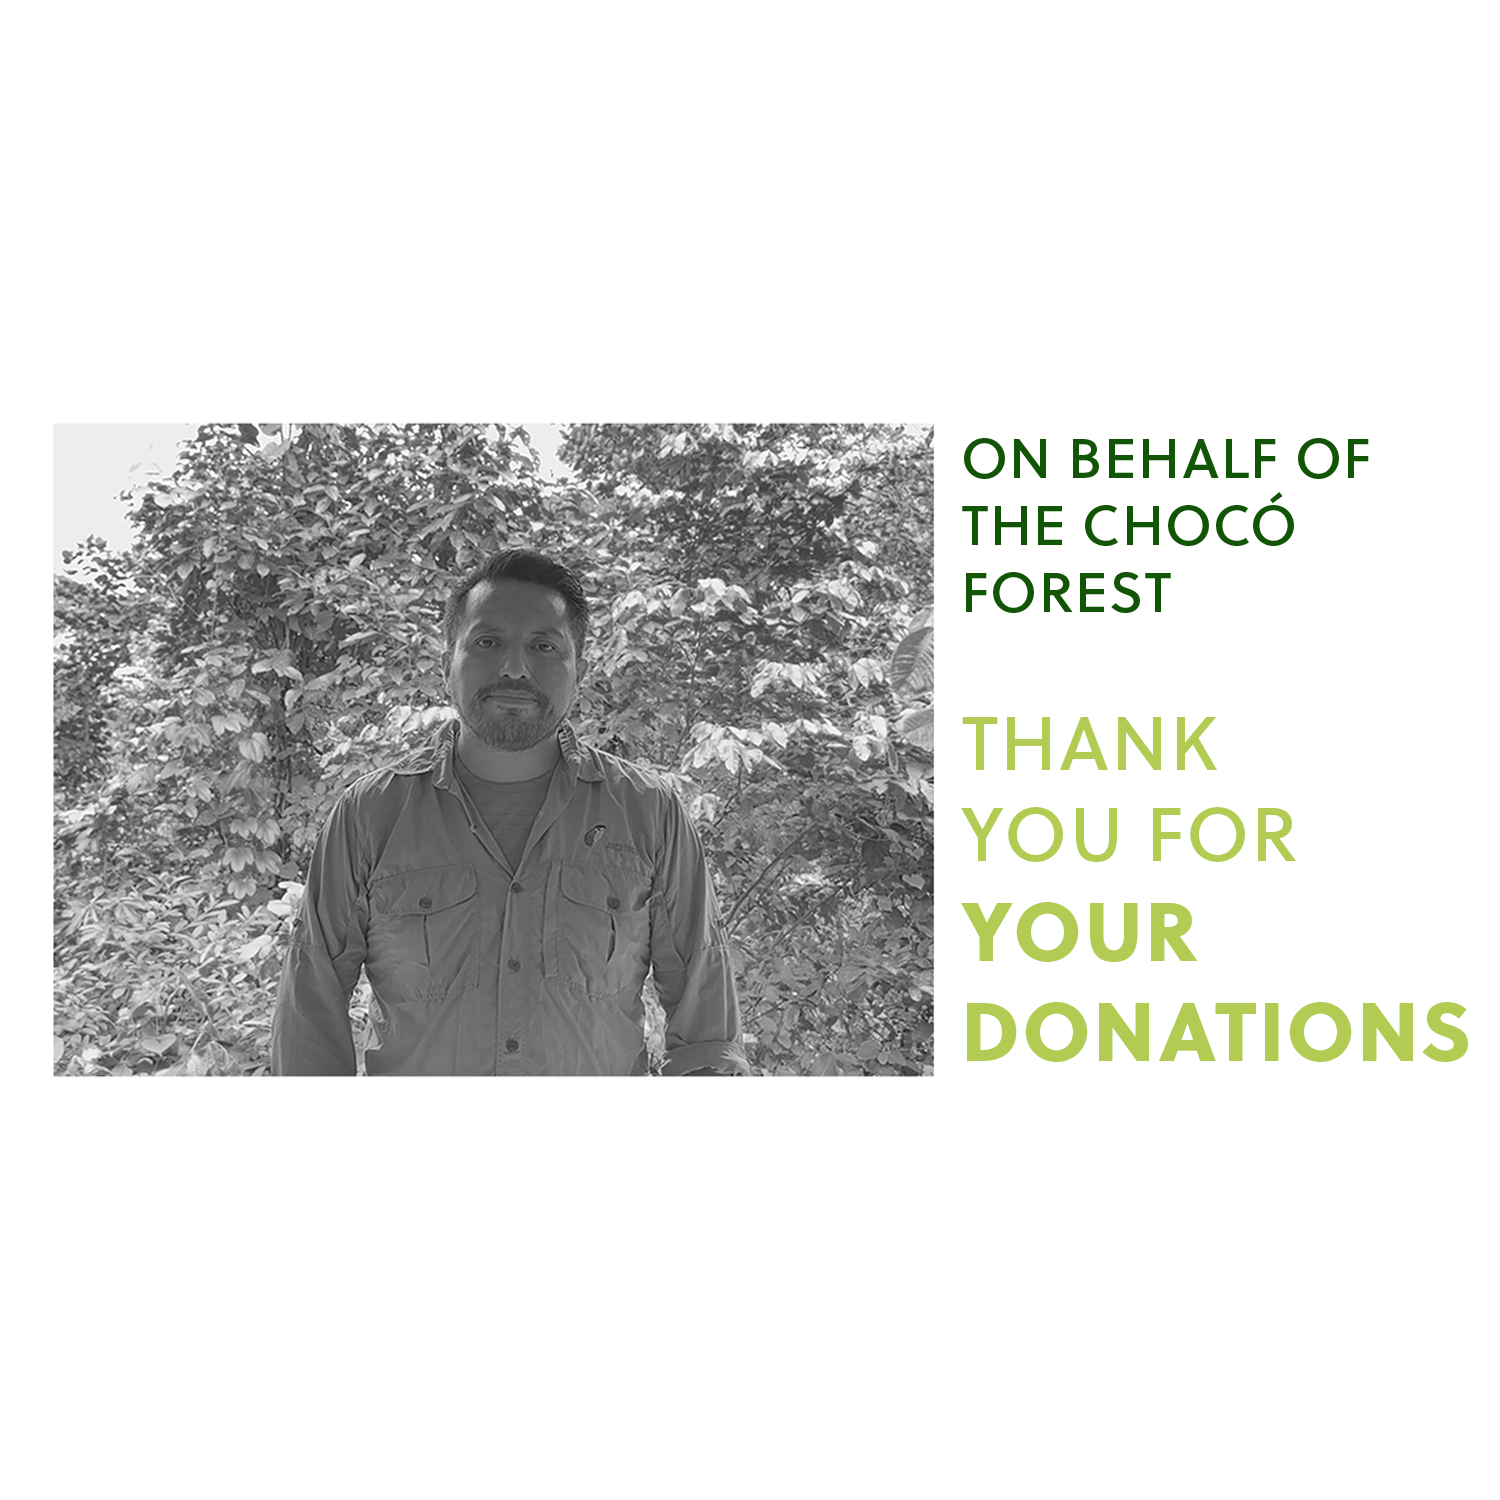 You have donated and this is what happened: Efrain Cepeda thanks you for saving land in the Choco in this video